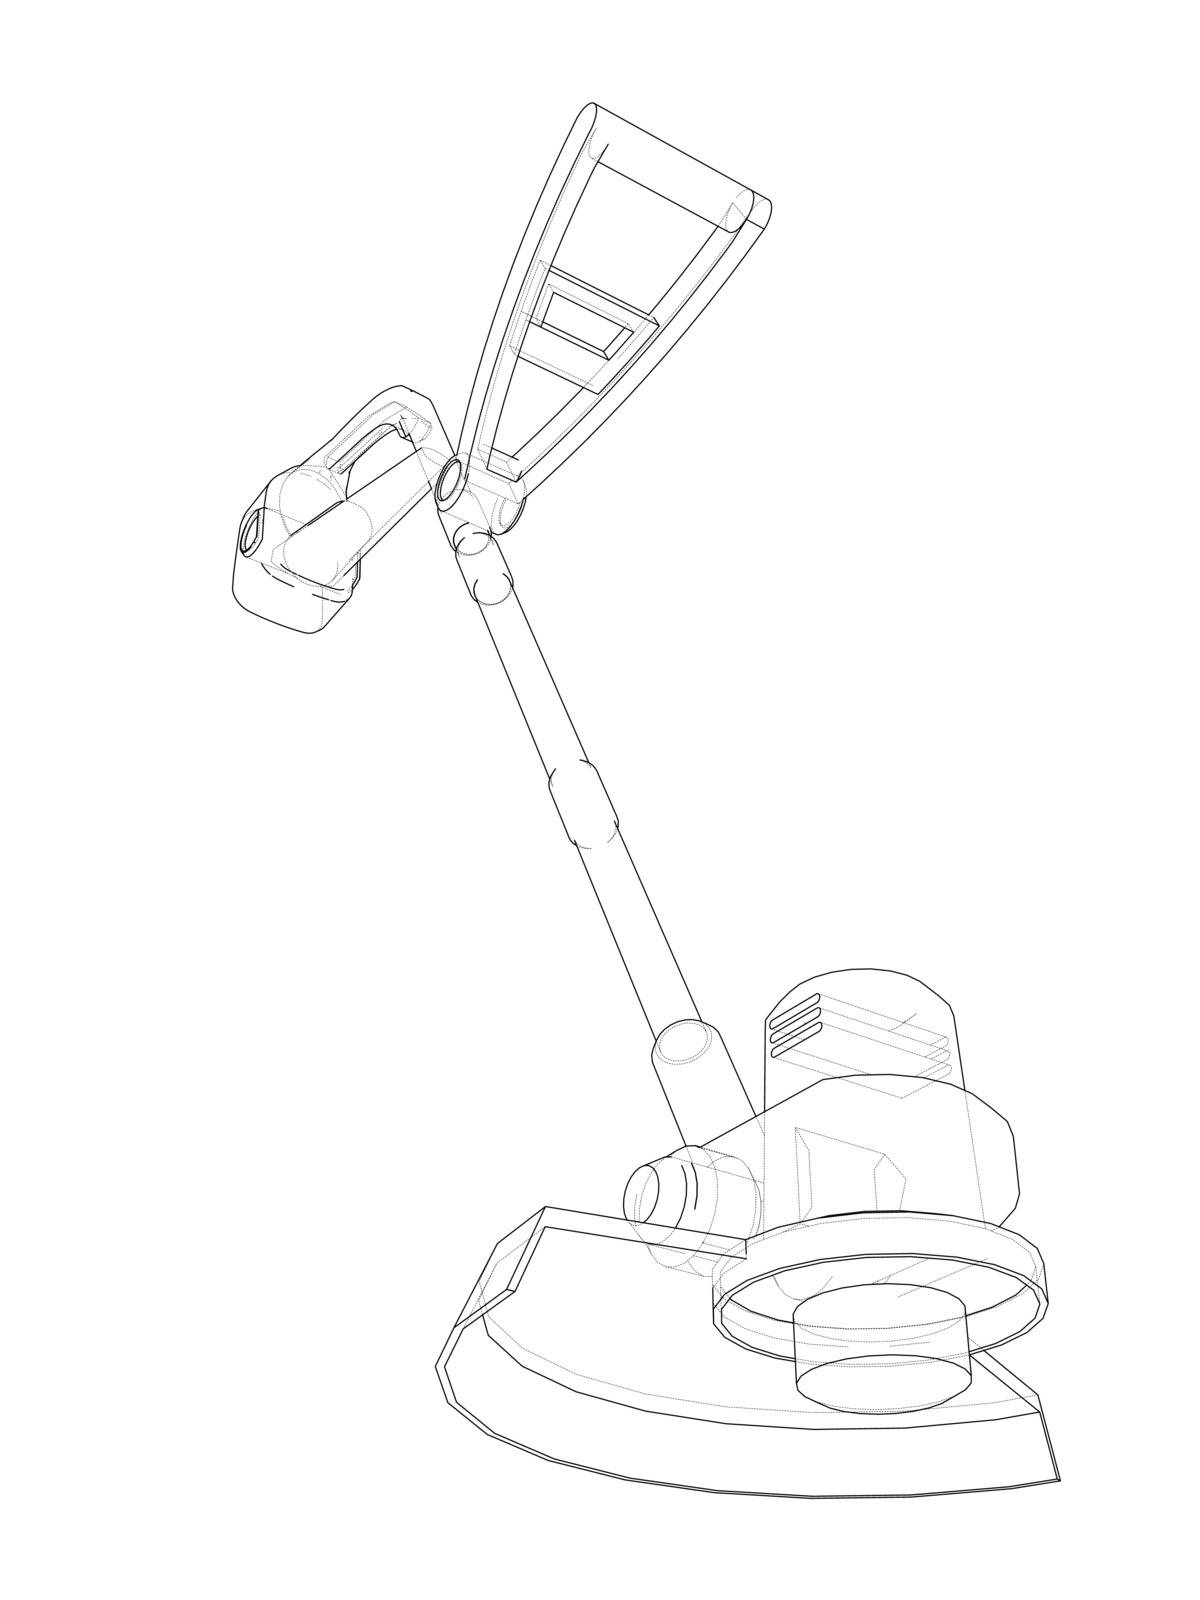 Outline trimmer grass cutter. Vector by cherezoff